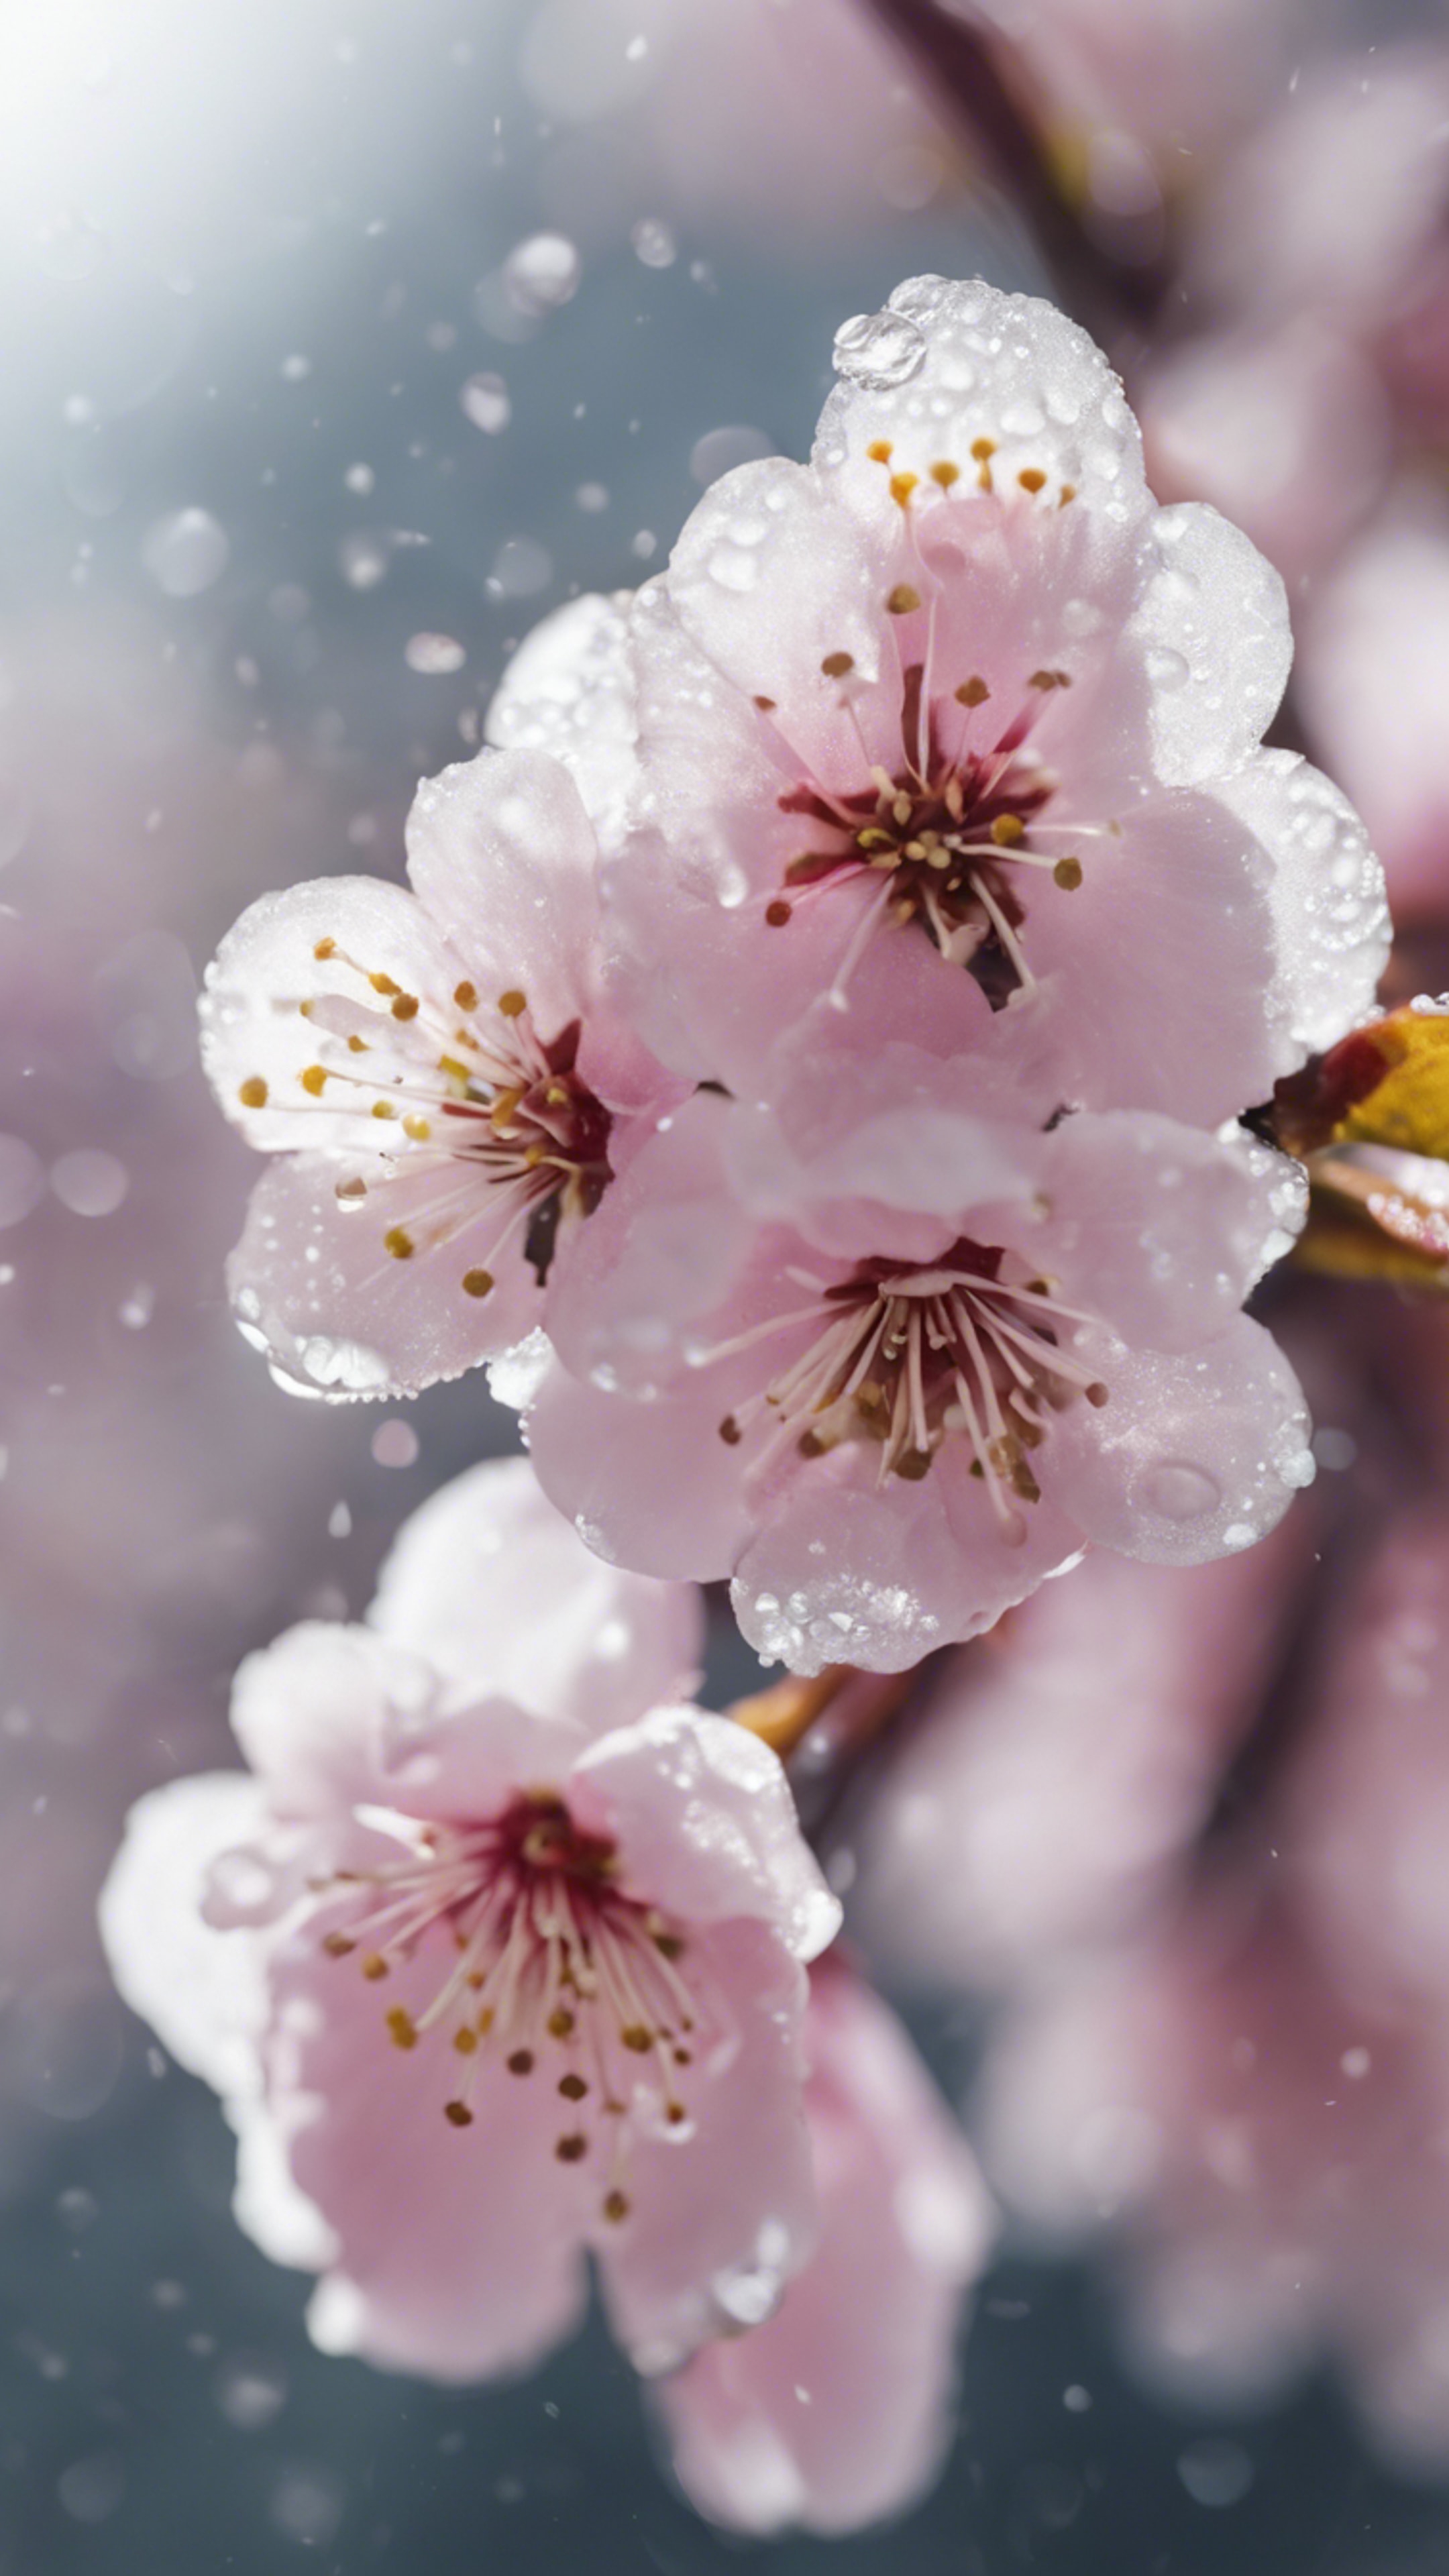 A closeup image of a freshly blooming cherry blossom, speckled with dew drops. Тапет[d7e9cc65cc424f509aa2]